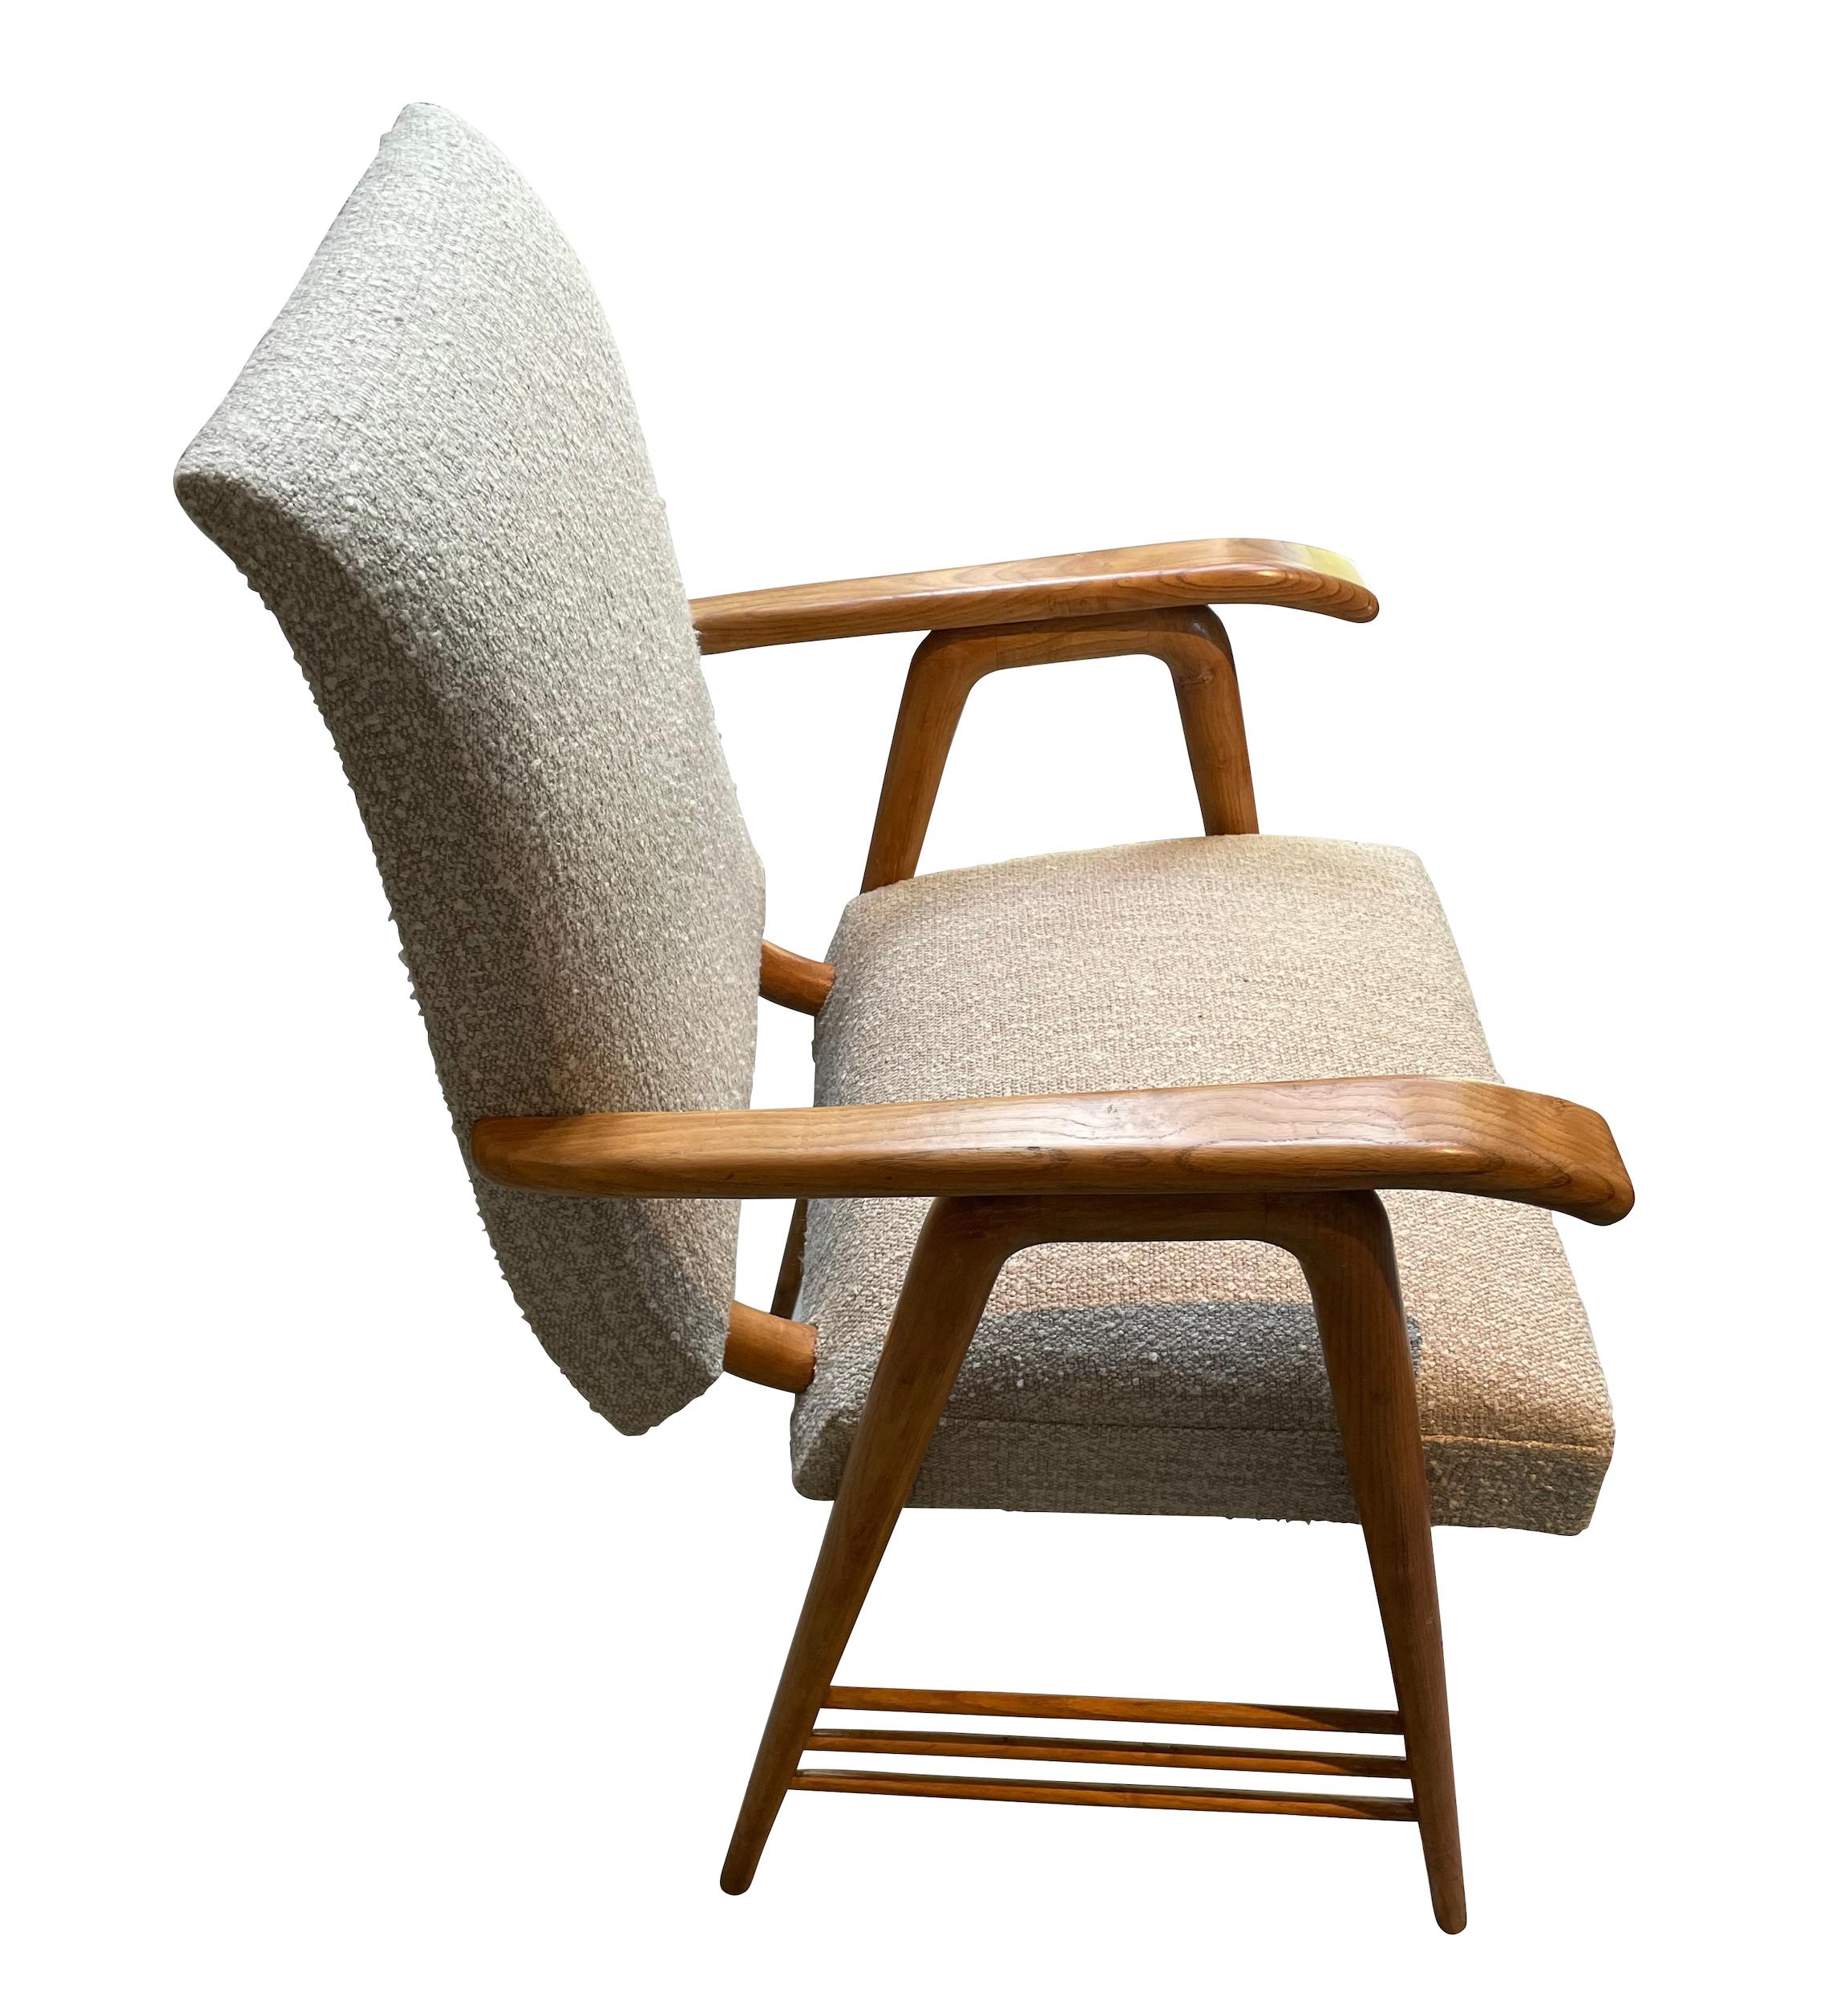 Italian Blond Ash Desk Chair Style Of Gio Ponti, Italy, 1940s For Sale